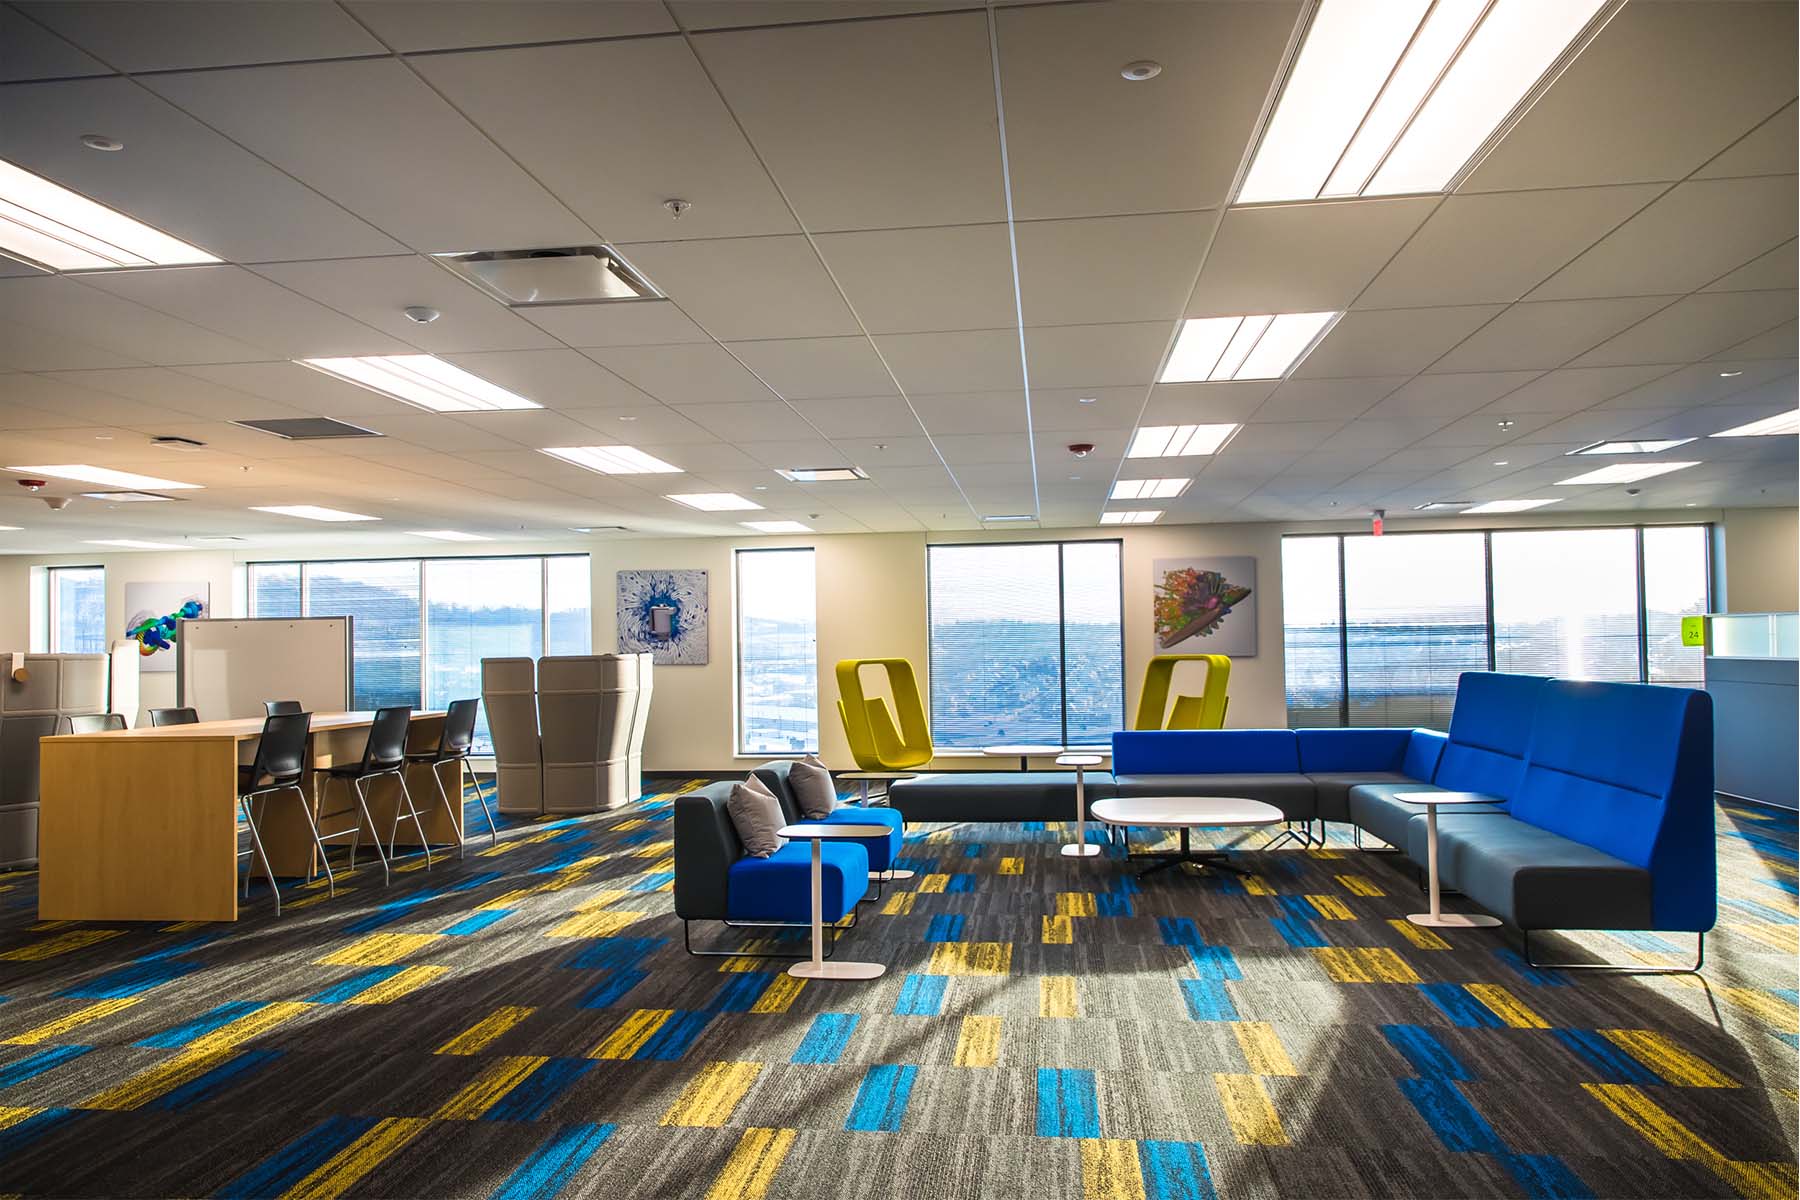 Office with blue, yellow, and gray furniture, and carpet, and large windows